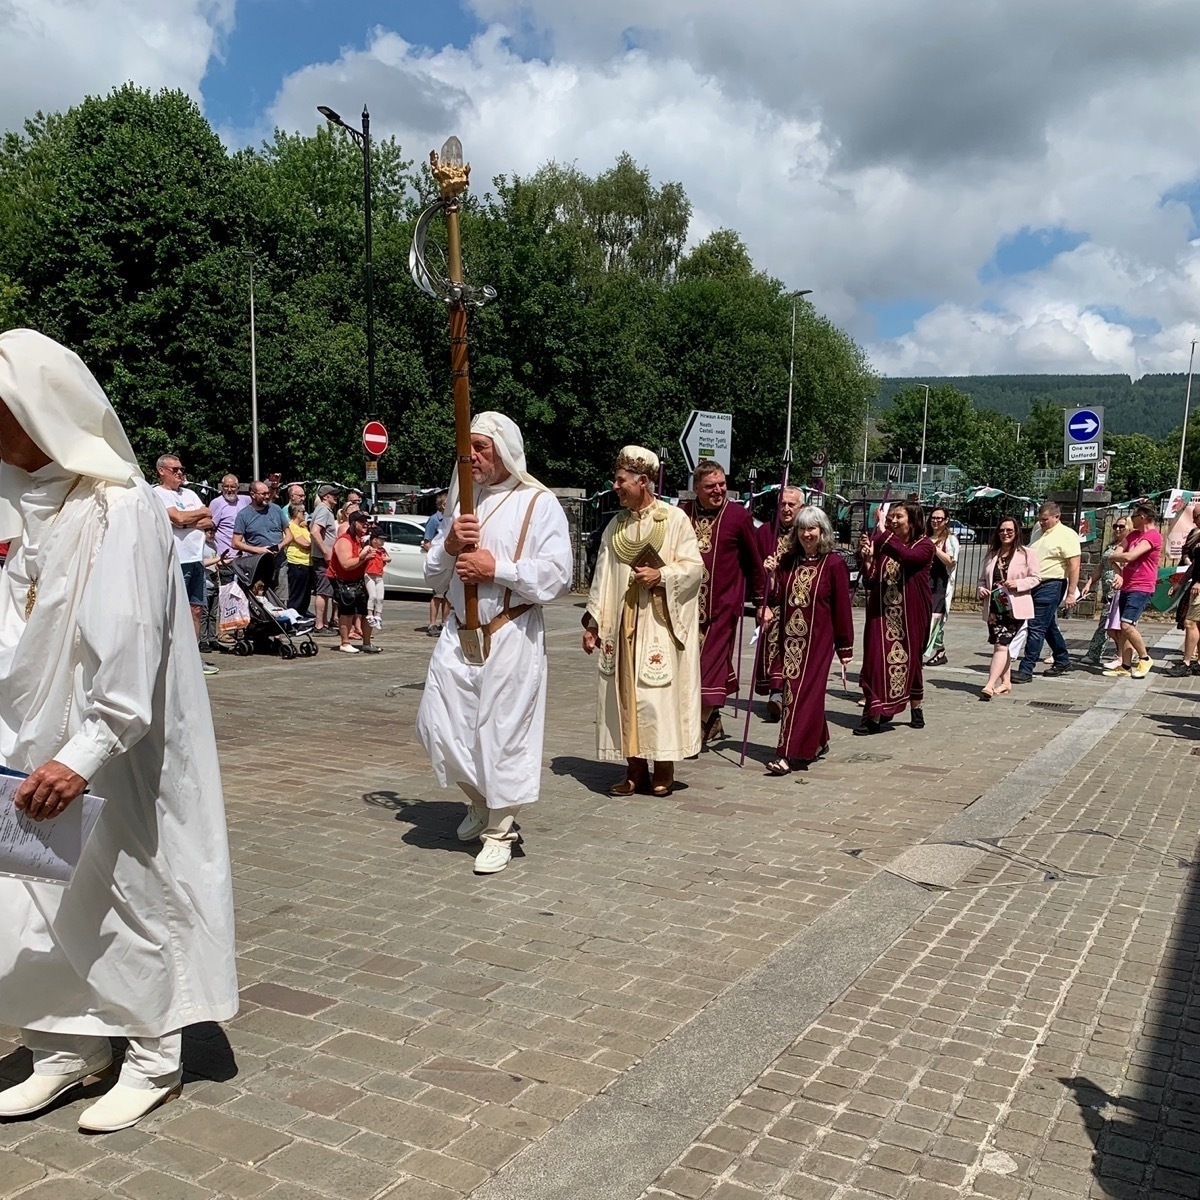 IProcession of people in Druidic robes through a town centre